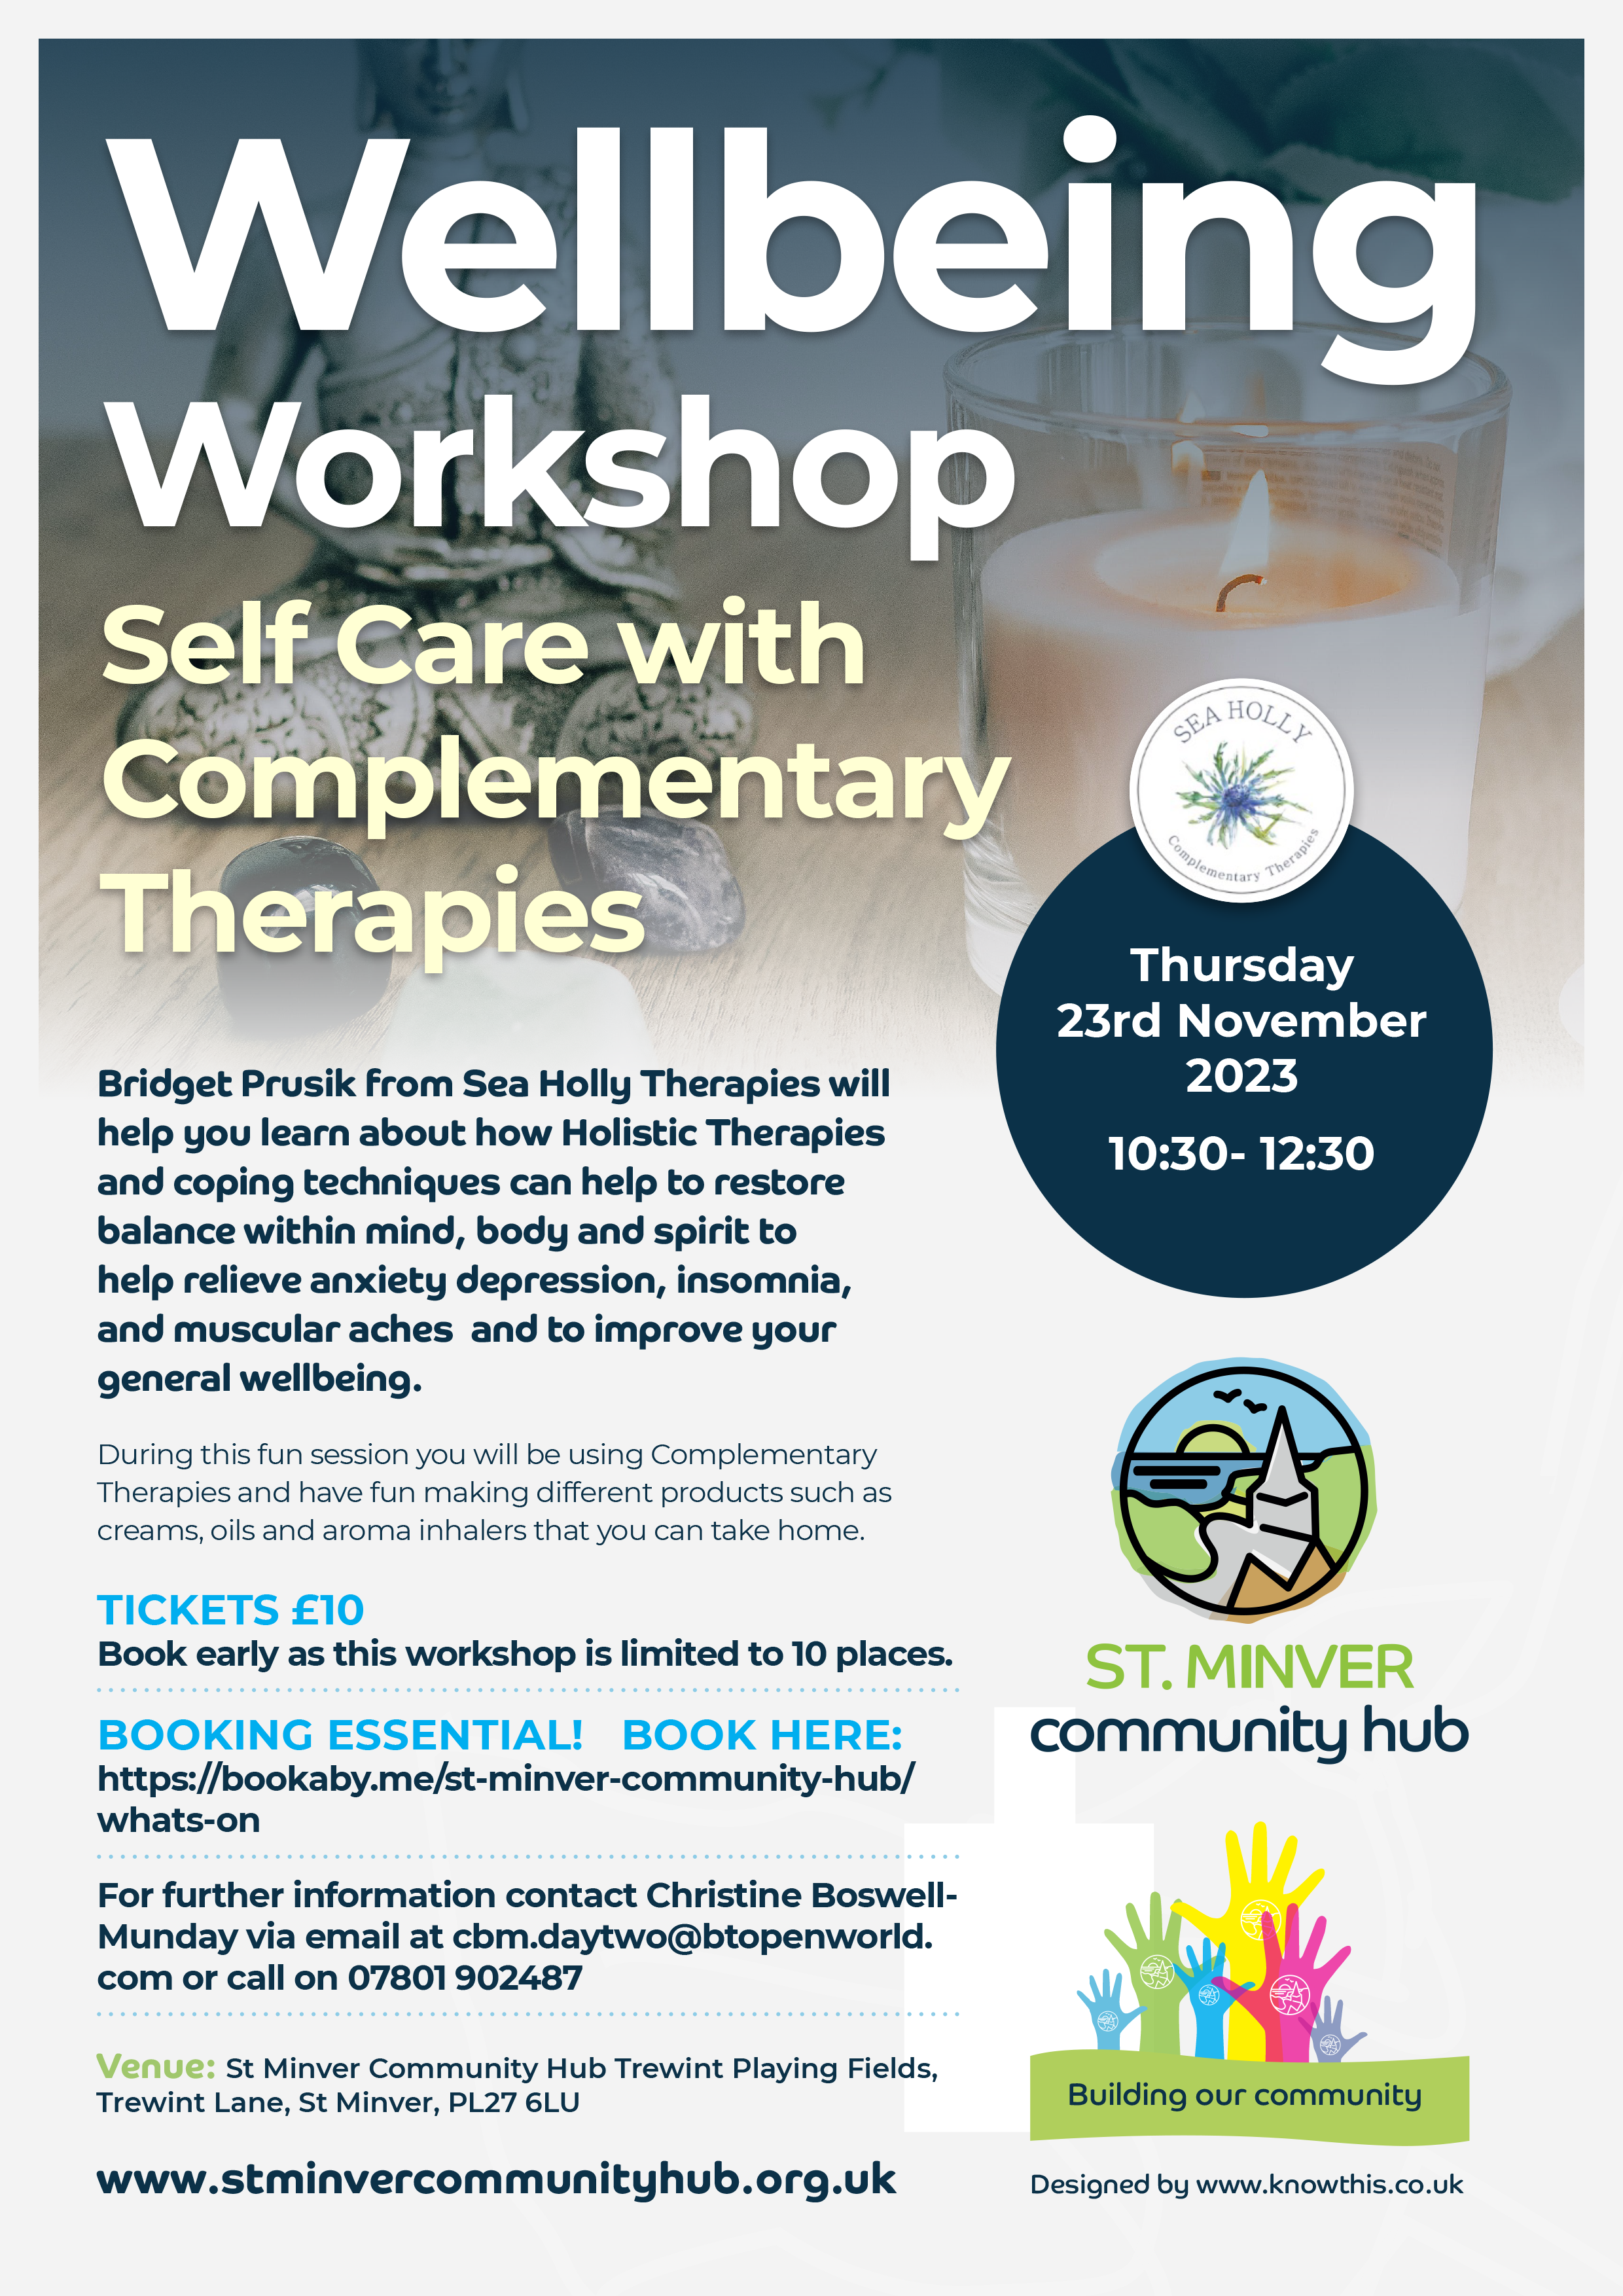 Wellbeing Workshop - Self Care with Complementary Therapies